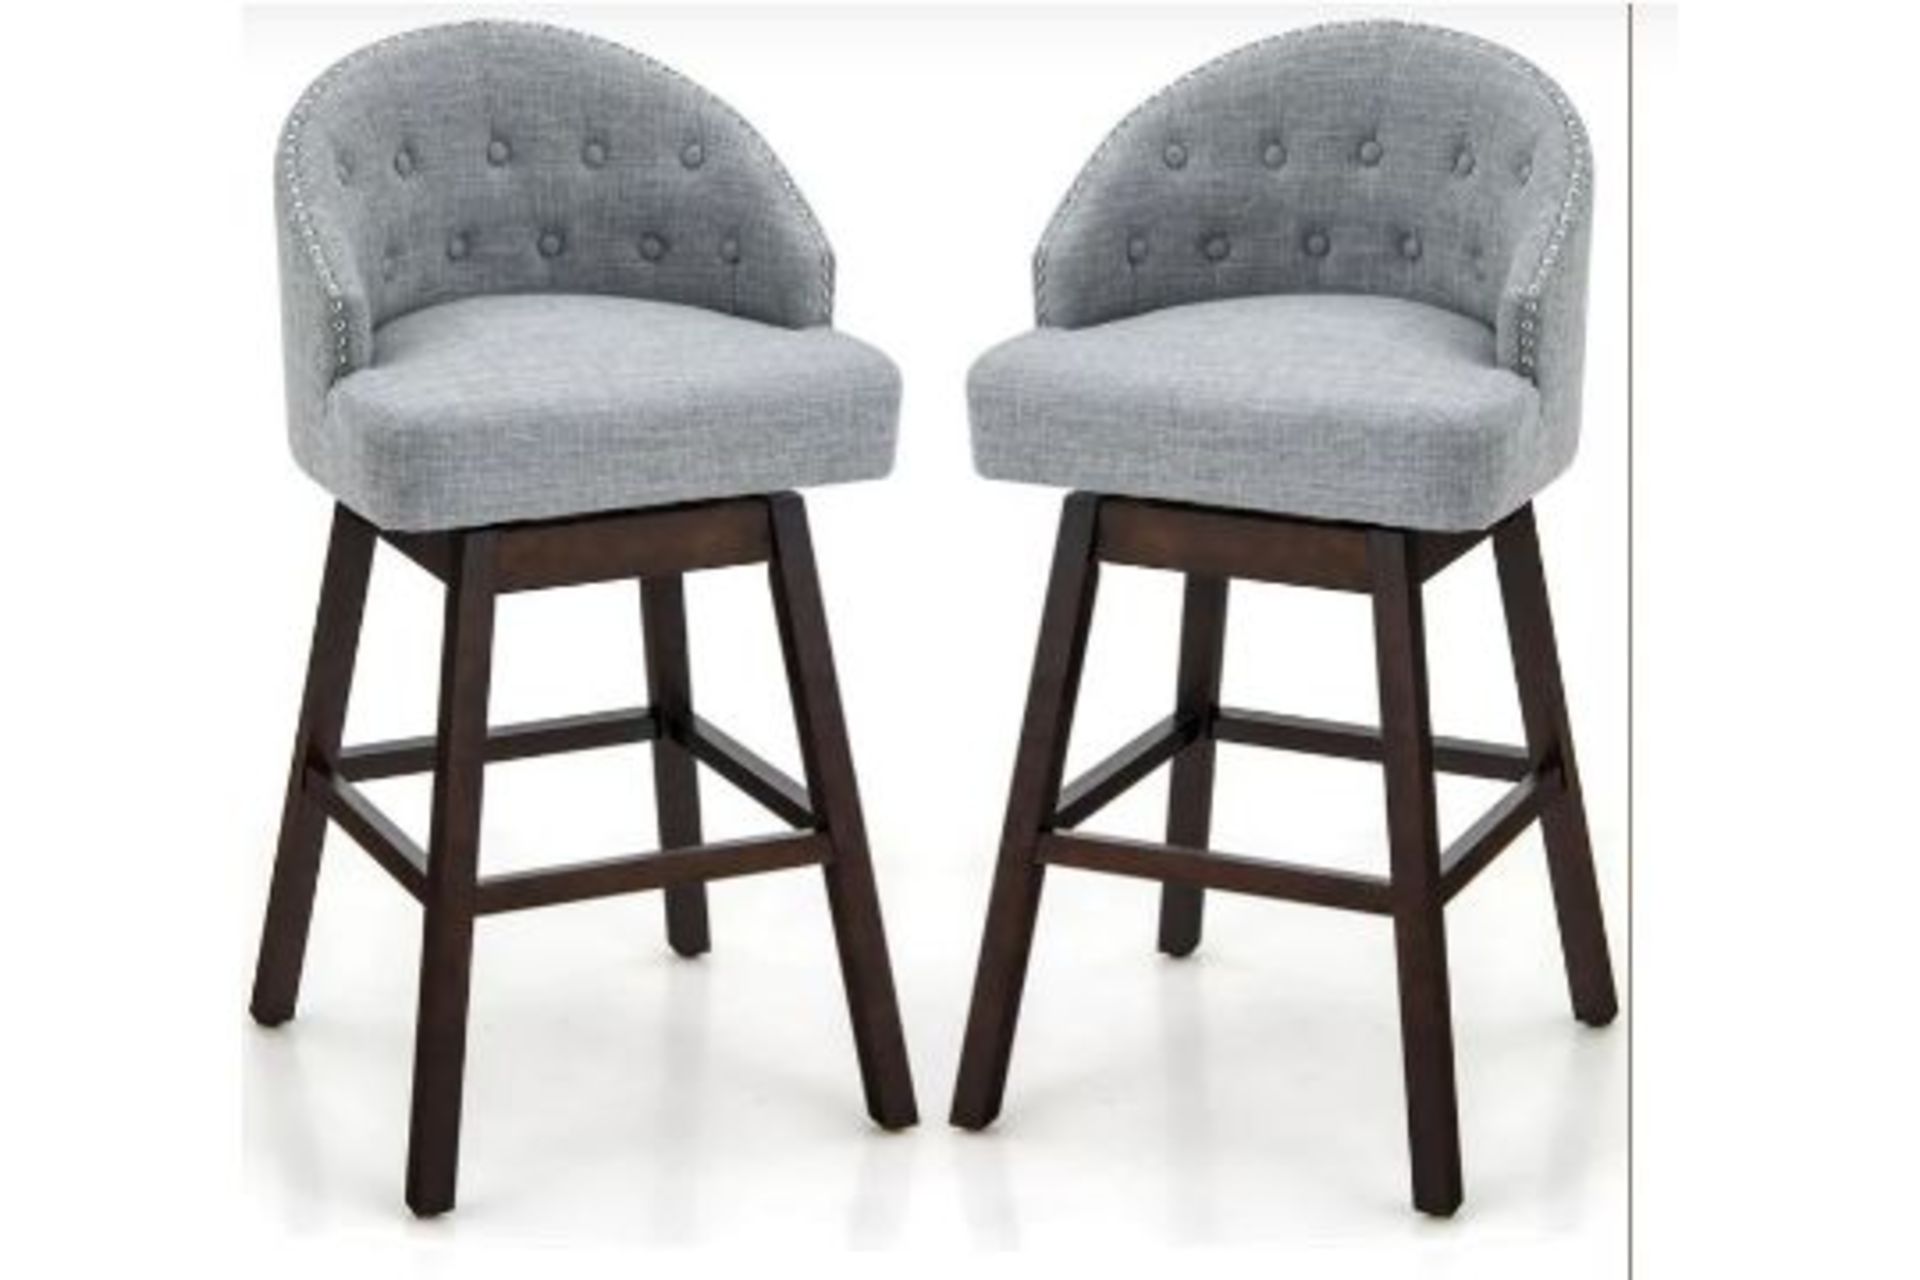 SWIVEL BAR STOOLS WITH RUBBER WOOD LEGS AND PADDED BACK-GREY. - R14.12. This bar stools feature